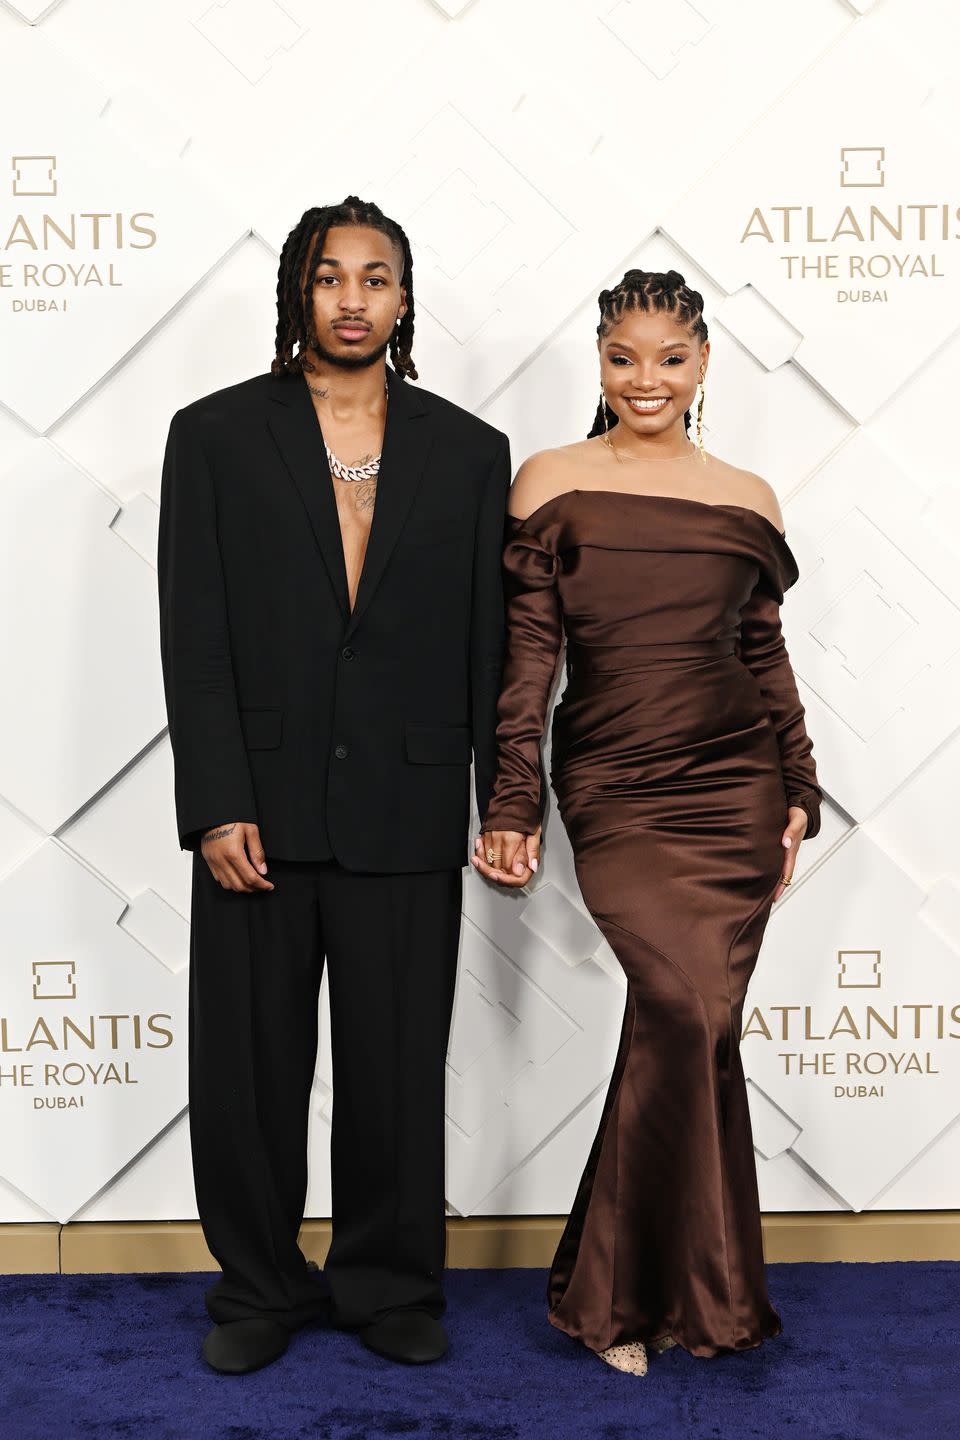 dubai, united arab emirates january 21 ddg and halle bailey attend the grand reveal weekend for atlantis the royal, dubais new ultra luxury hotel on january 21, 2023 in dubai, united arab emirates photo by jeff spicergetty images for atlantis the royal